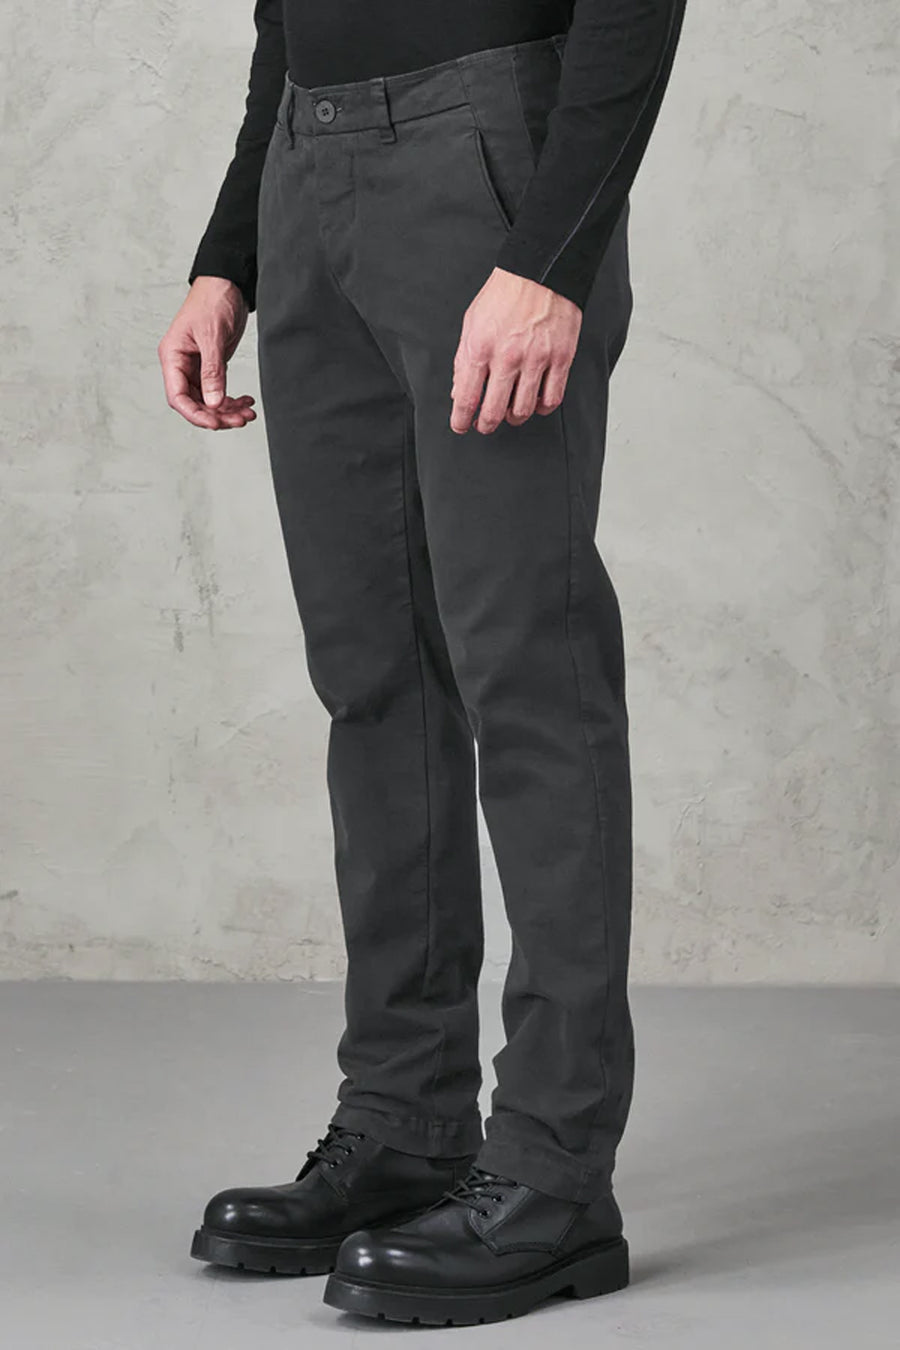 Buy the Transit Cotton Stretch Regular Fit Chinos in Charcoal at Intro. Spend £50 for free UK delivery. Official stockists. We ship worldwide.